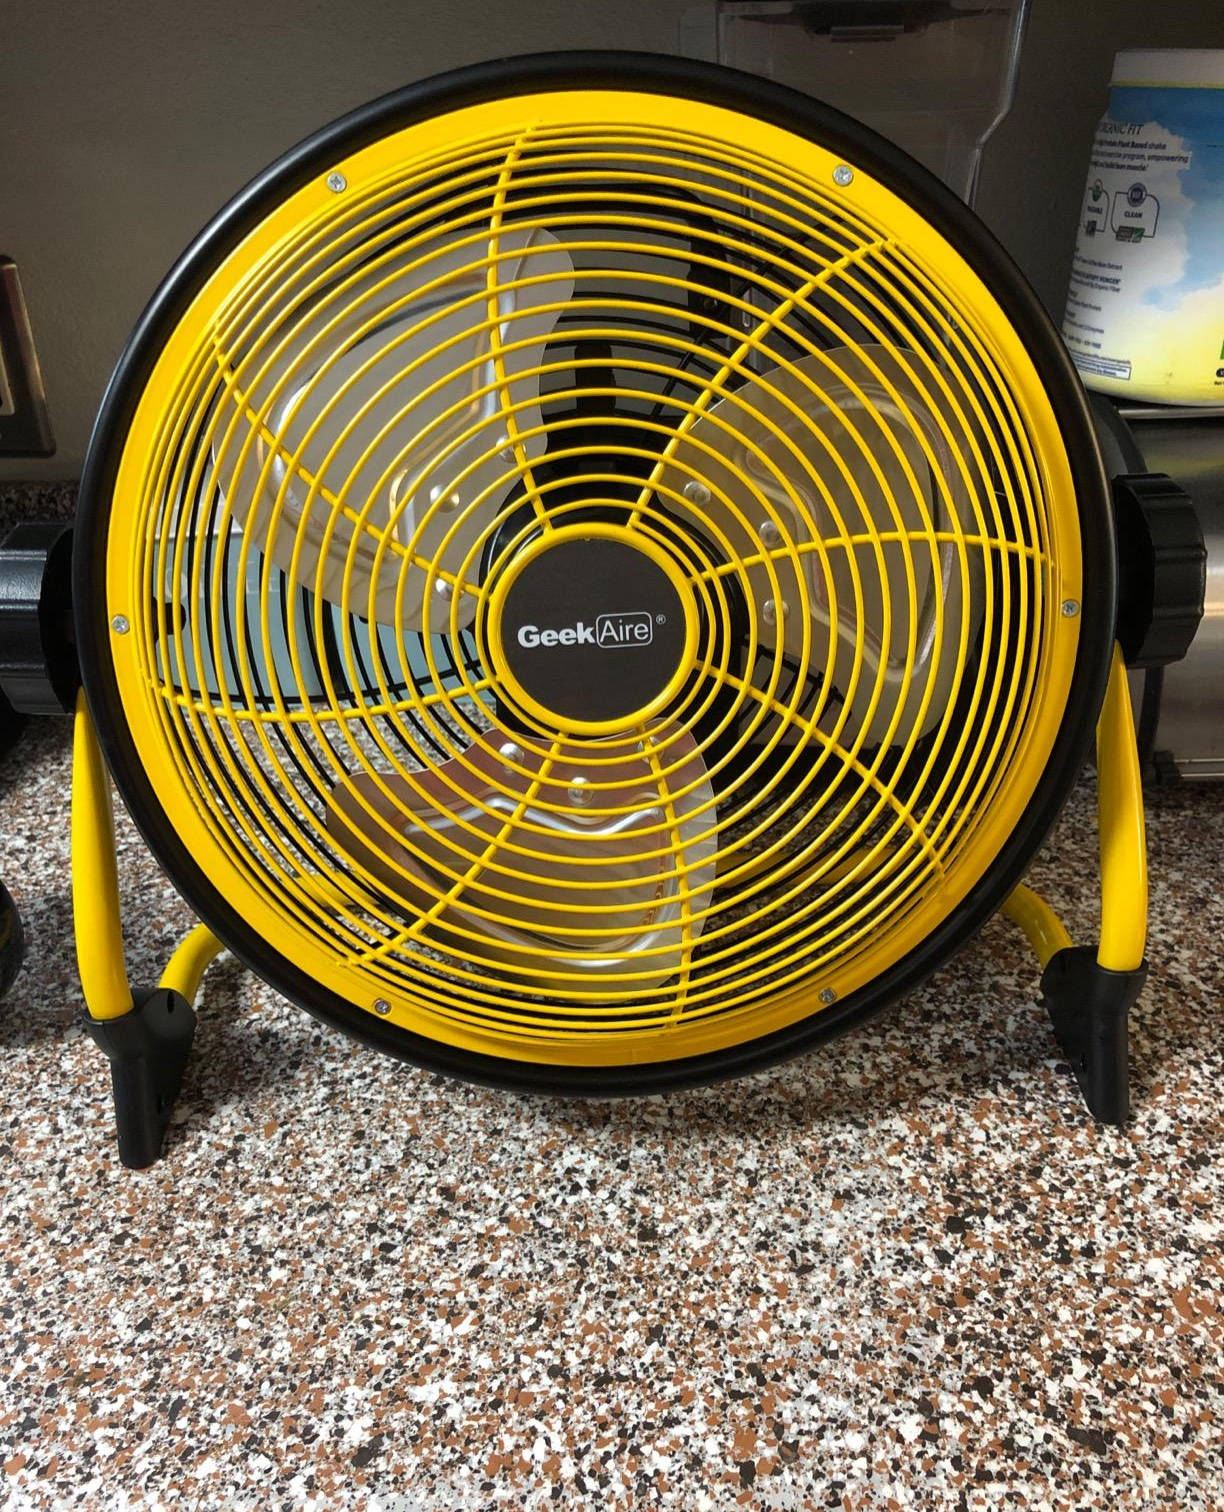 Top 10 Best Battery Operated Fans in 2023 